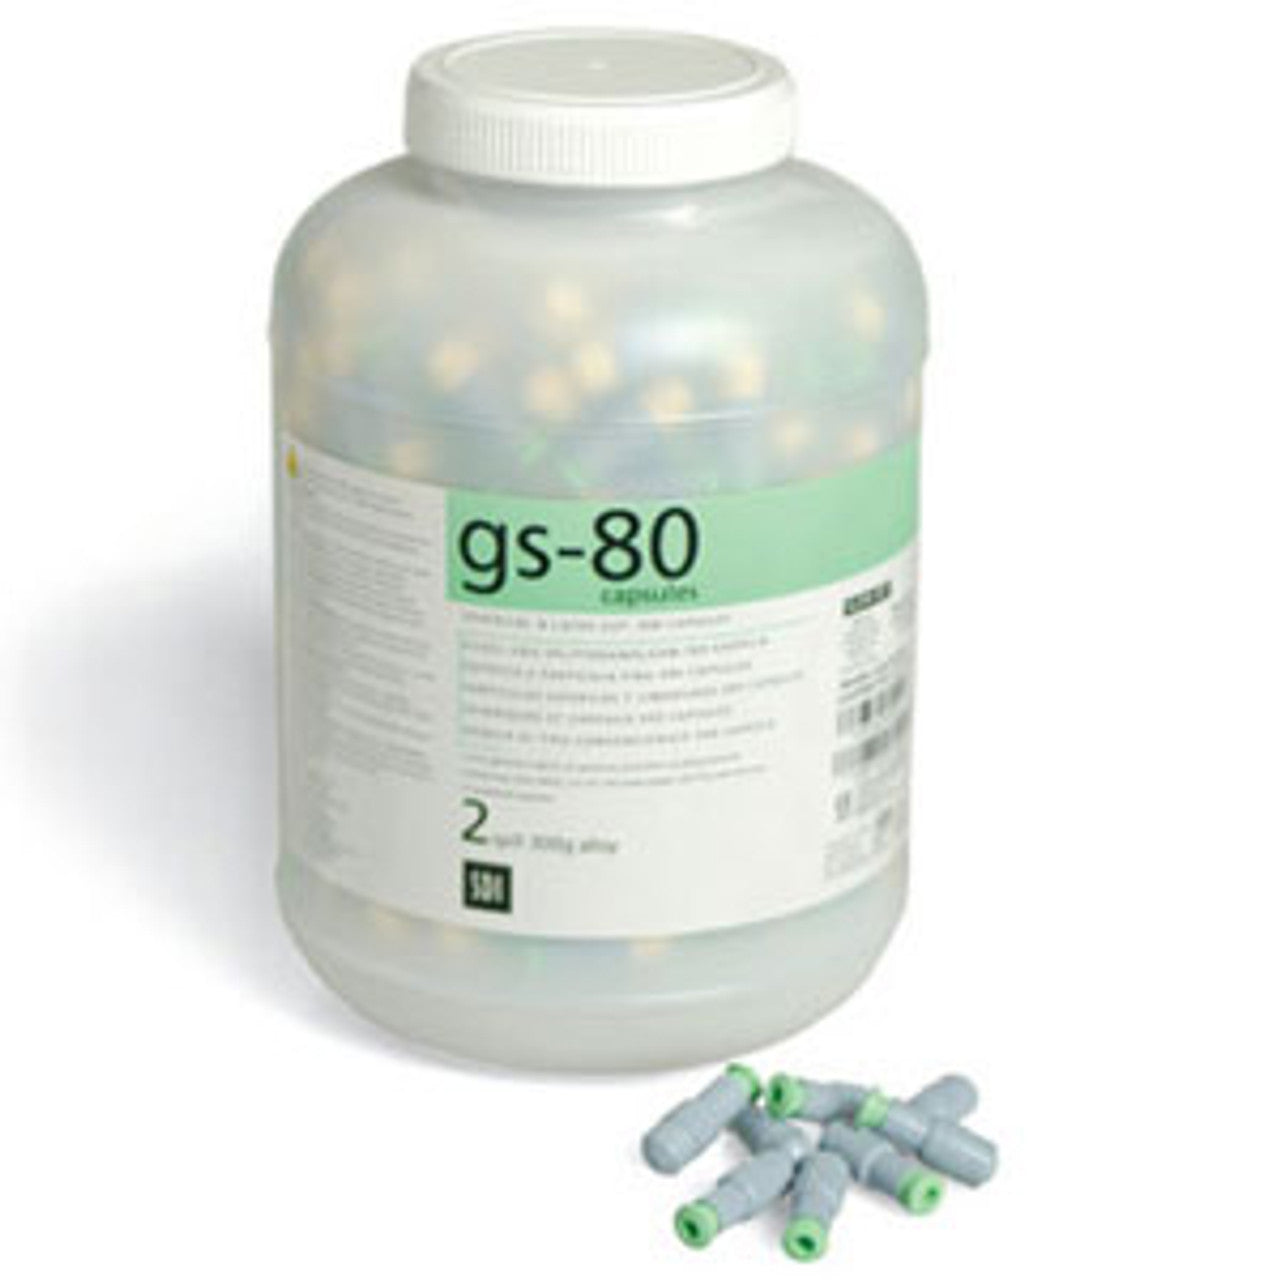 sdi-gs-80-dispersed-phase-alloy-double-spill-regular-set-600mg